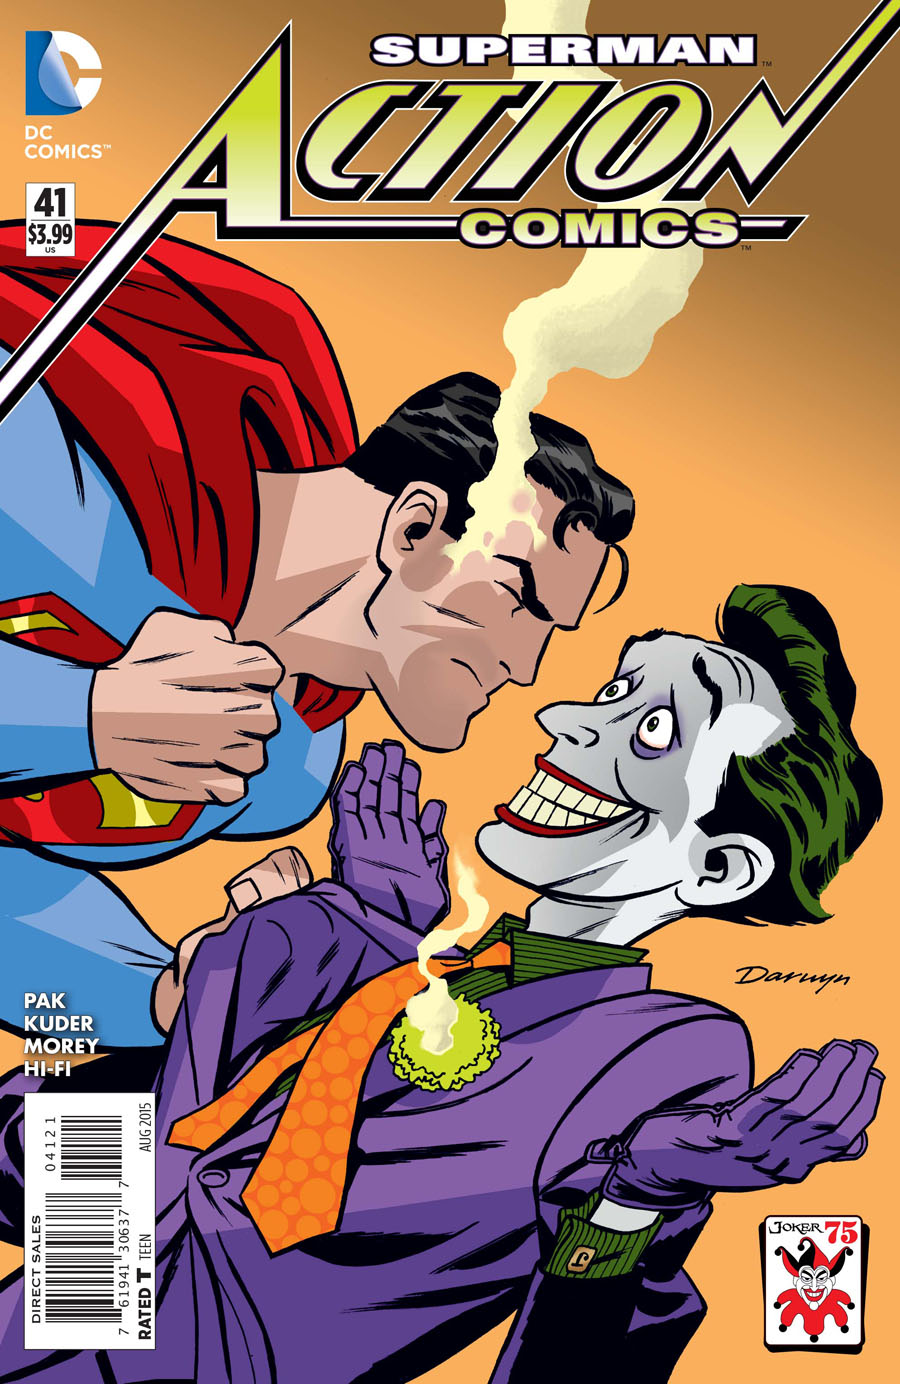 Action Comics Vol 2 #41 Cover B Variant Darwyn Cooke The Joker 75th Anniversary Cover